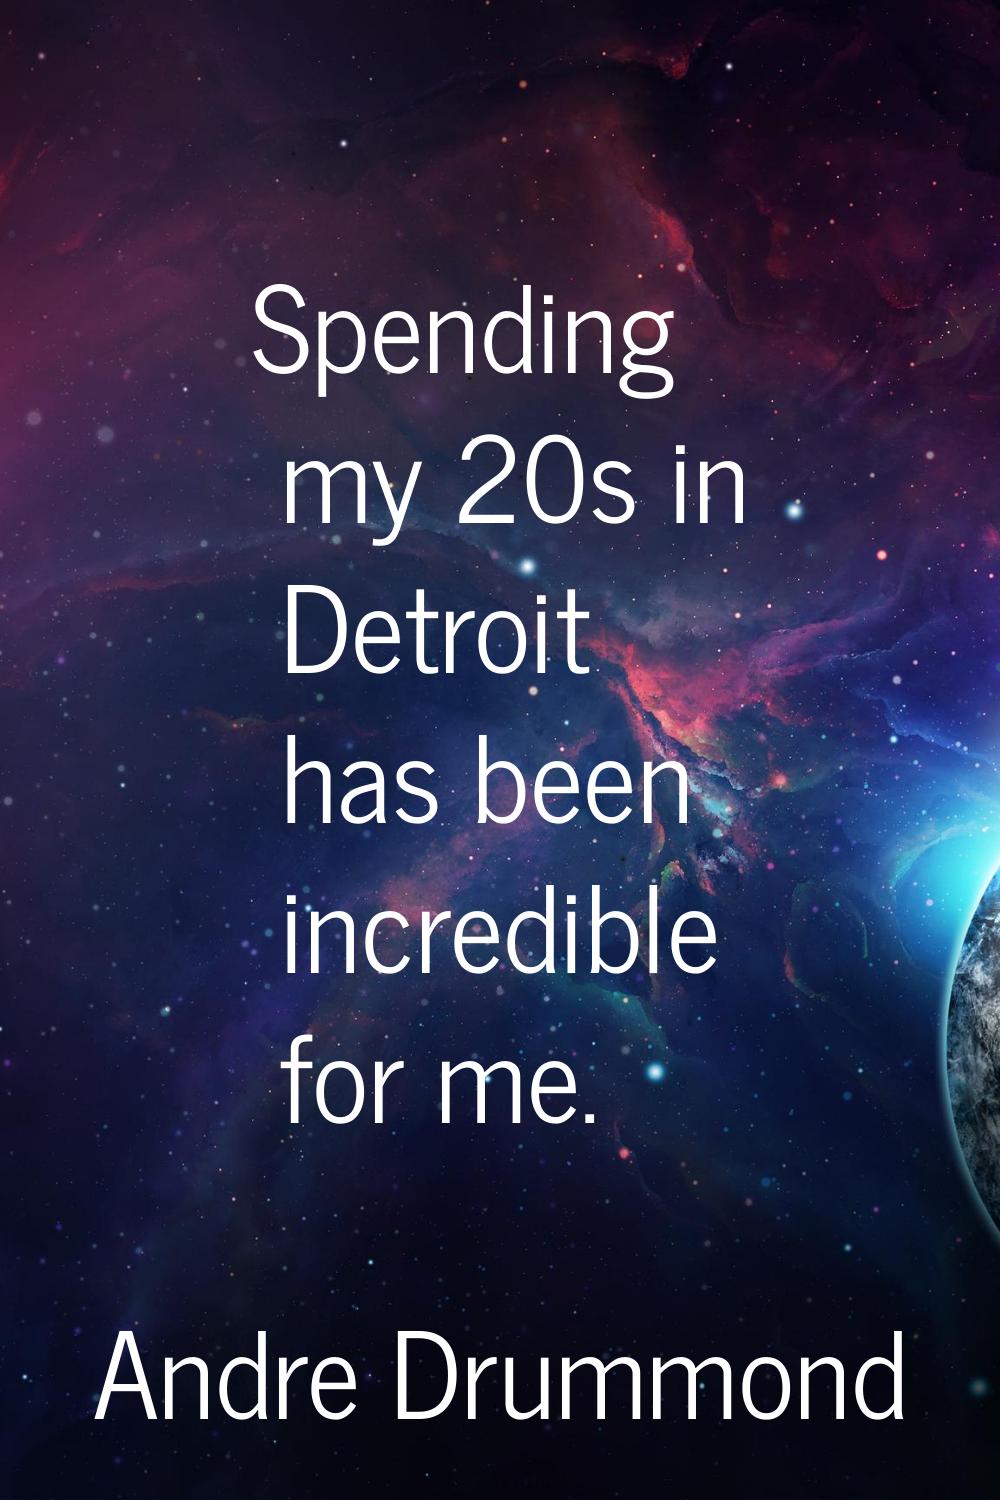 Spending my 20s in Detroit has been incredible for me.